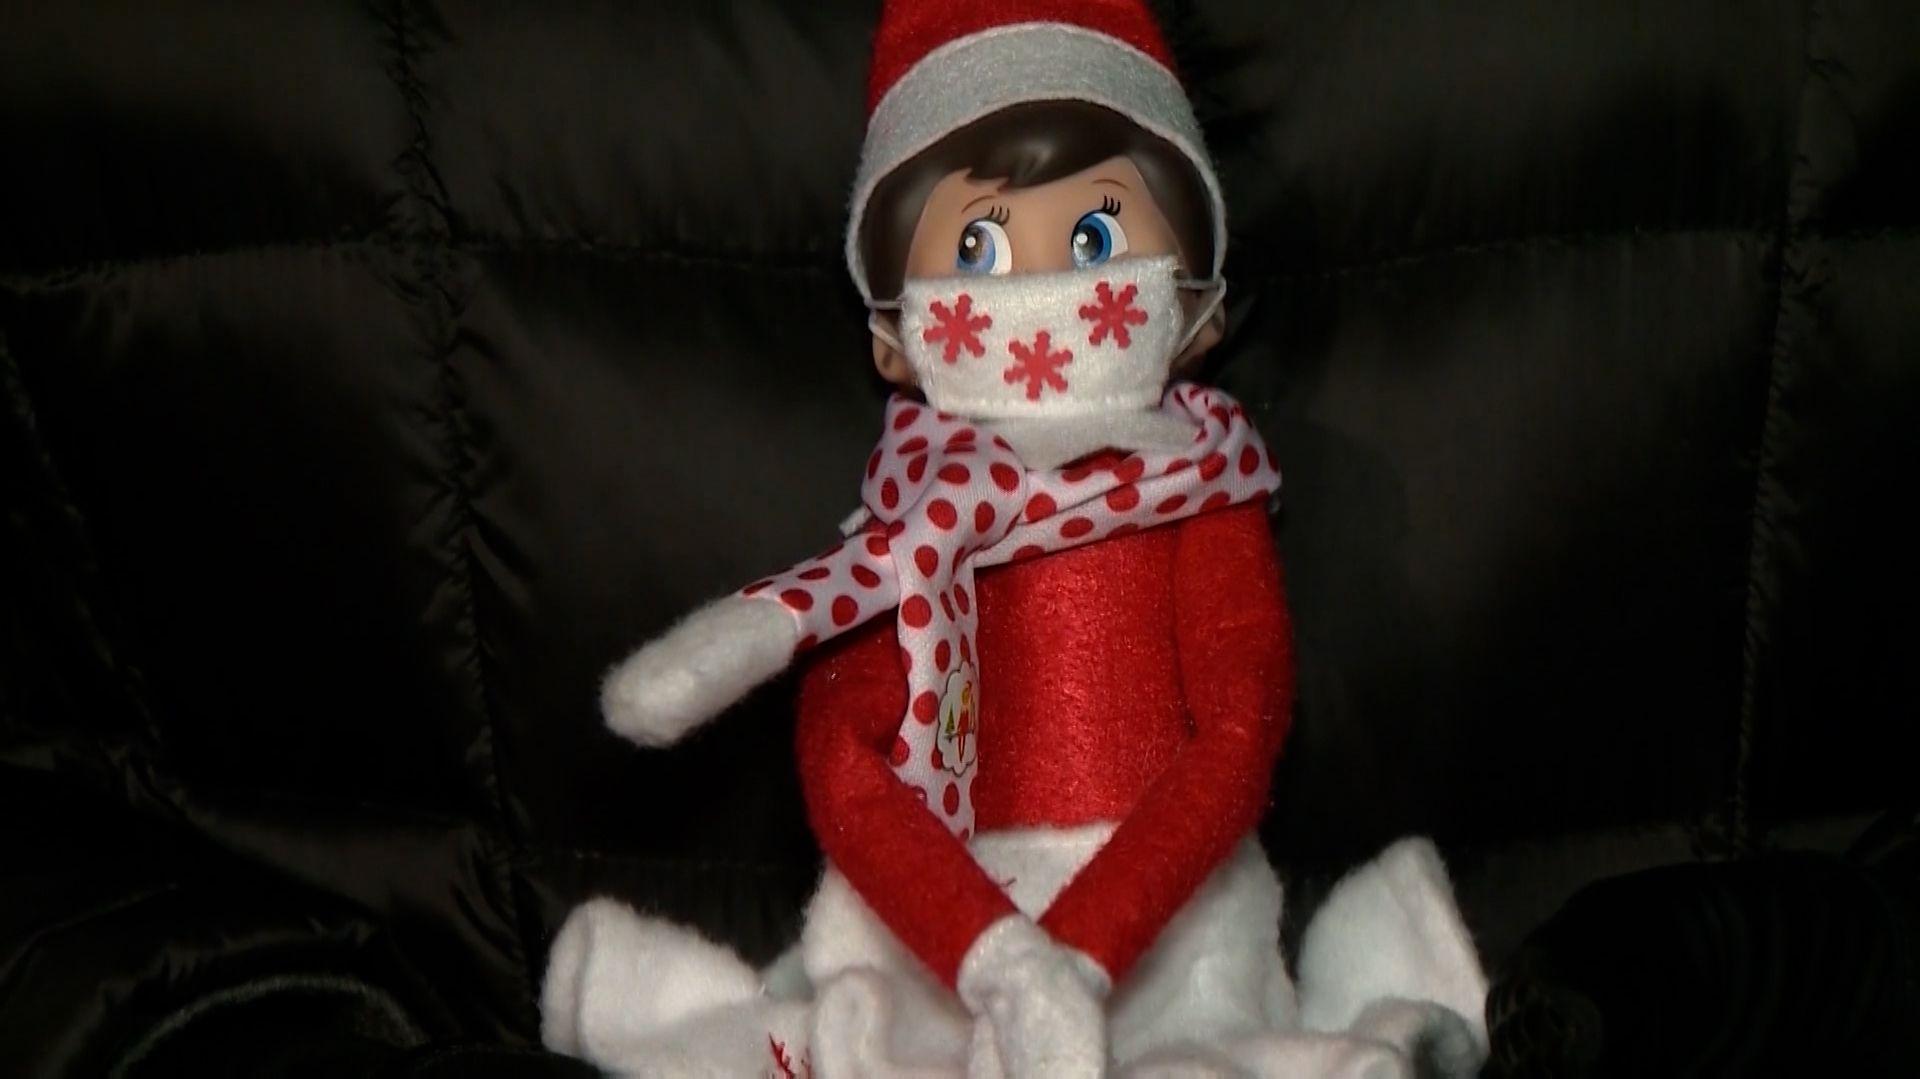 Inspired by loss woman puts a twist on Elf on the Shelf